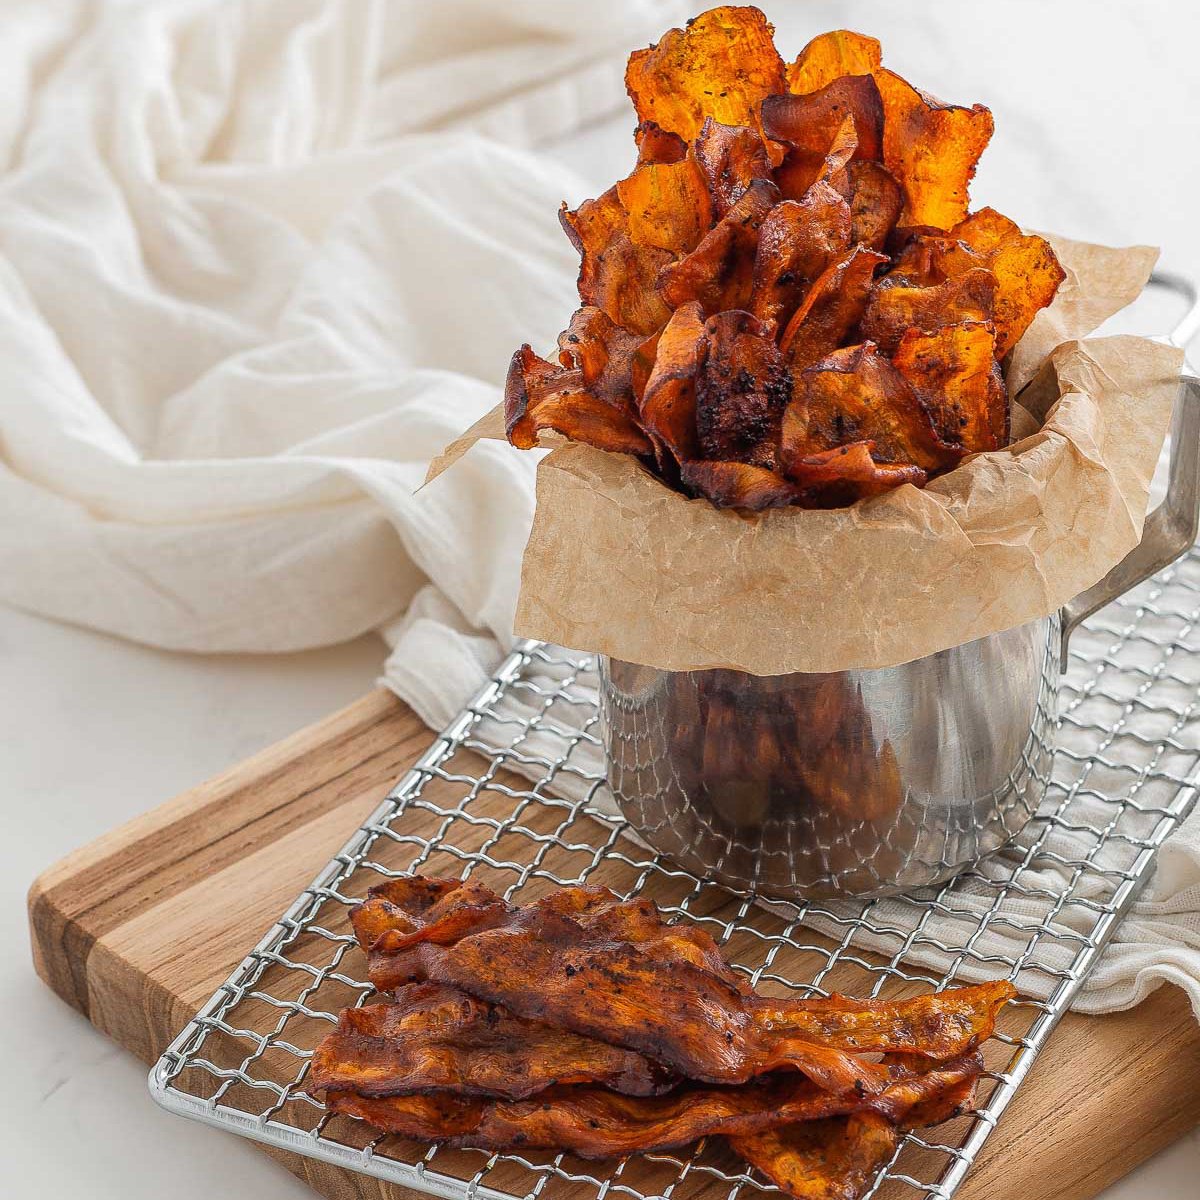 https://hungryfoodie.com/wp-content/uploads/2022/06/Carrot-Bacon-Vegan-Bacon-Hungry-Foodie.jpg